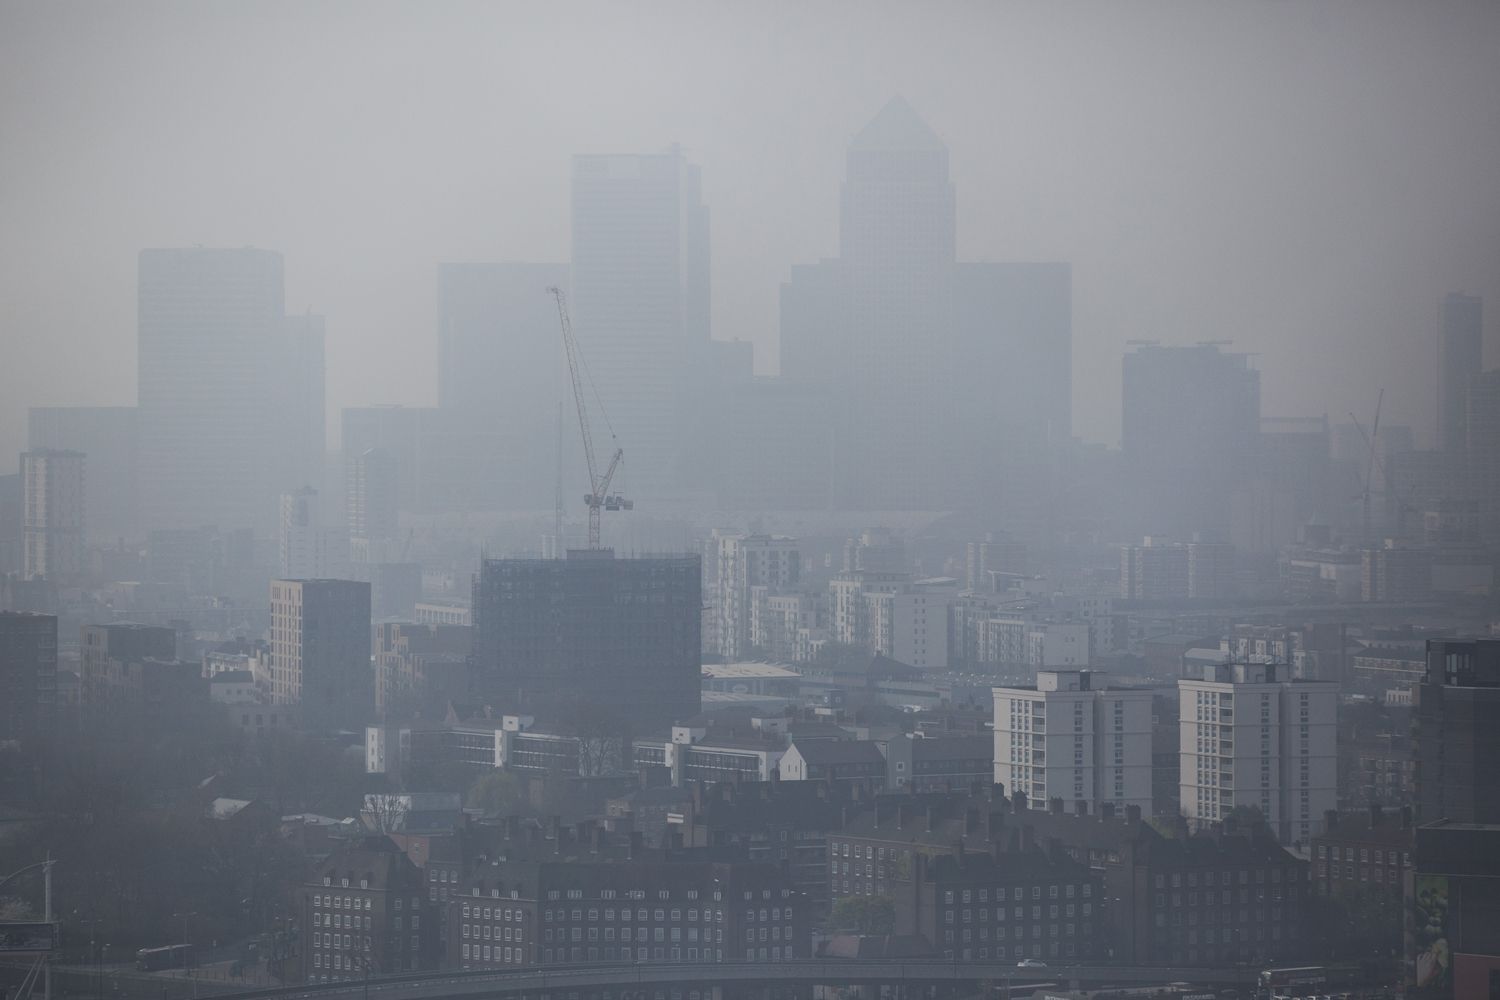 A general view through smog of the Canary Wharf financial district on April 2, 2014 in London.